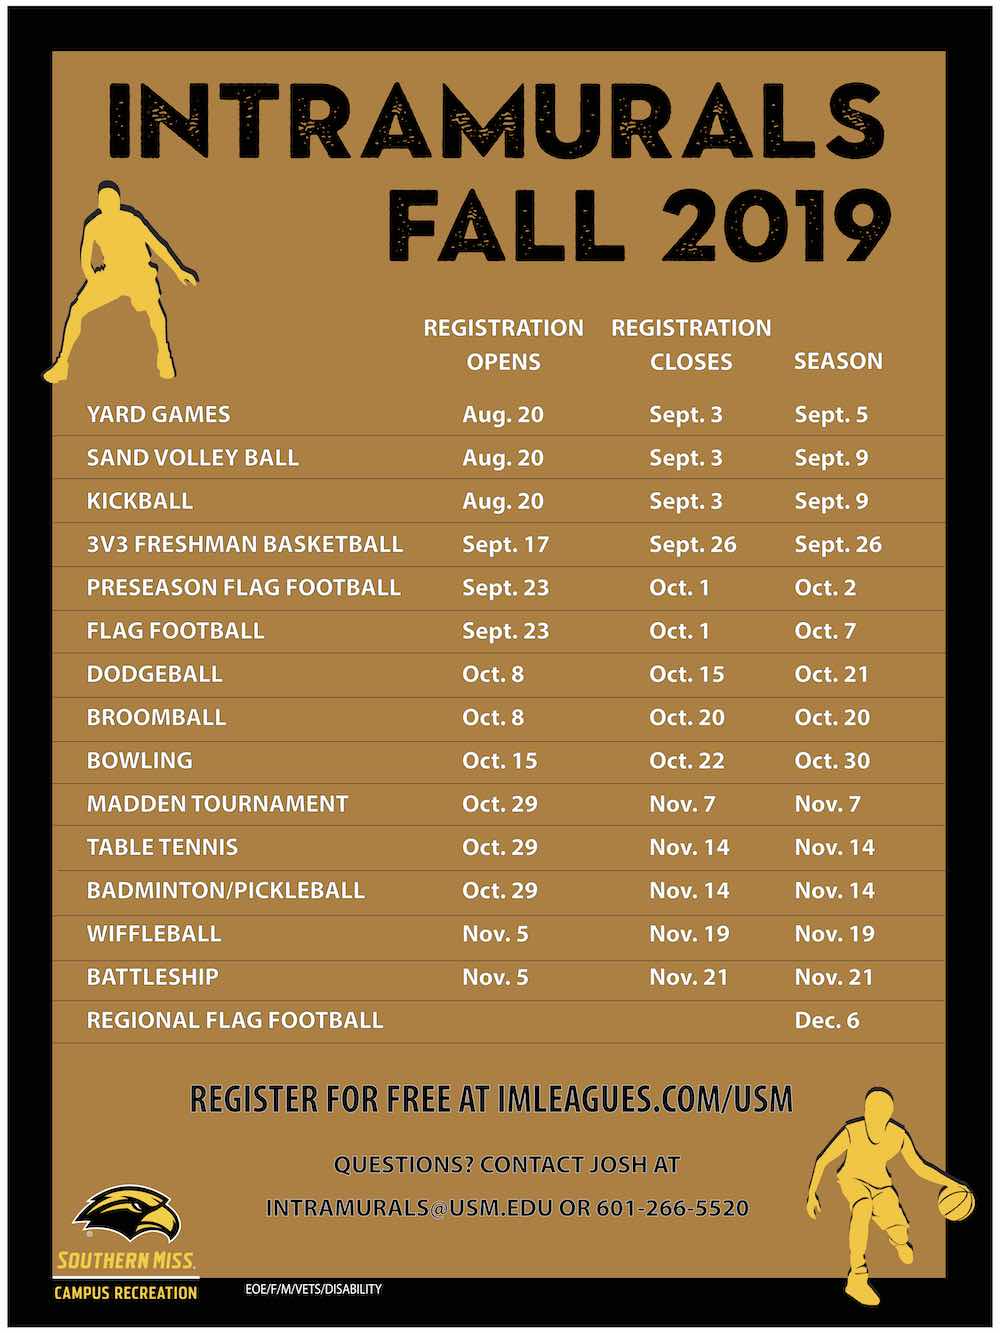 Intramurals | Campus Recreation | The University of Southern Mississippi